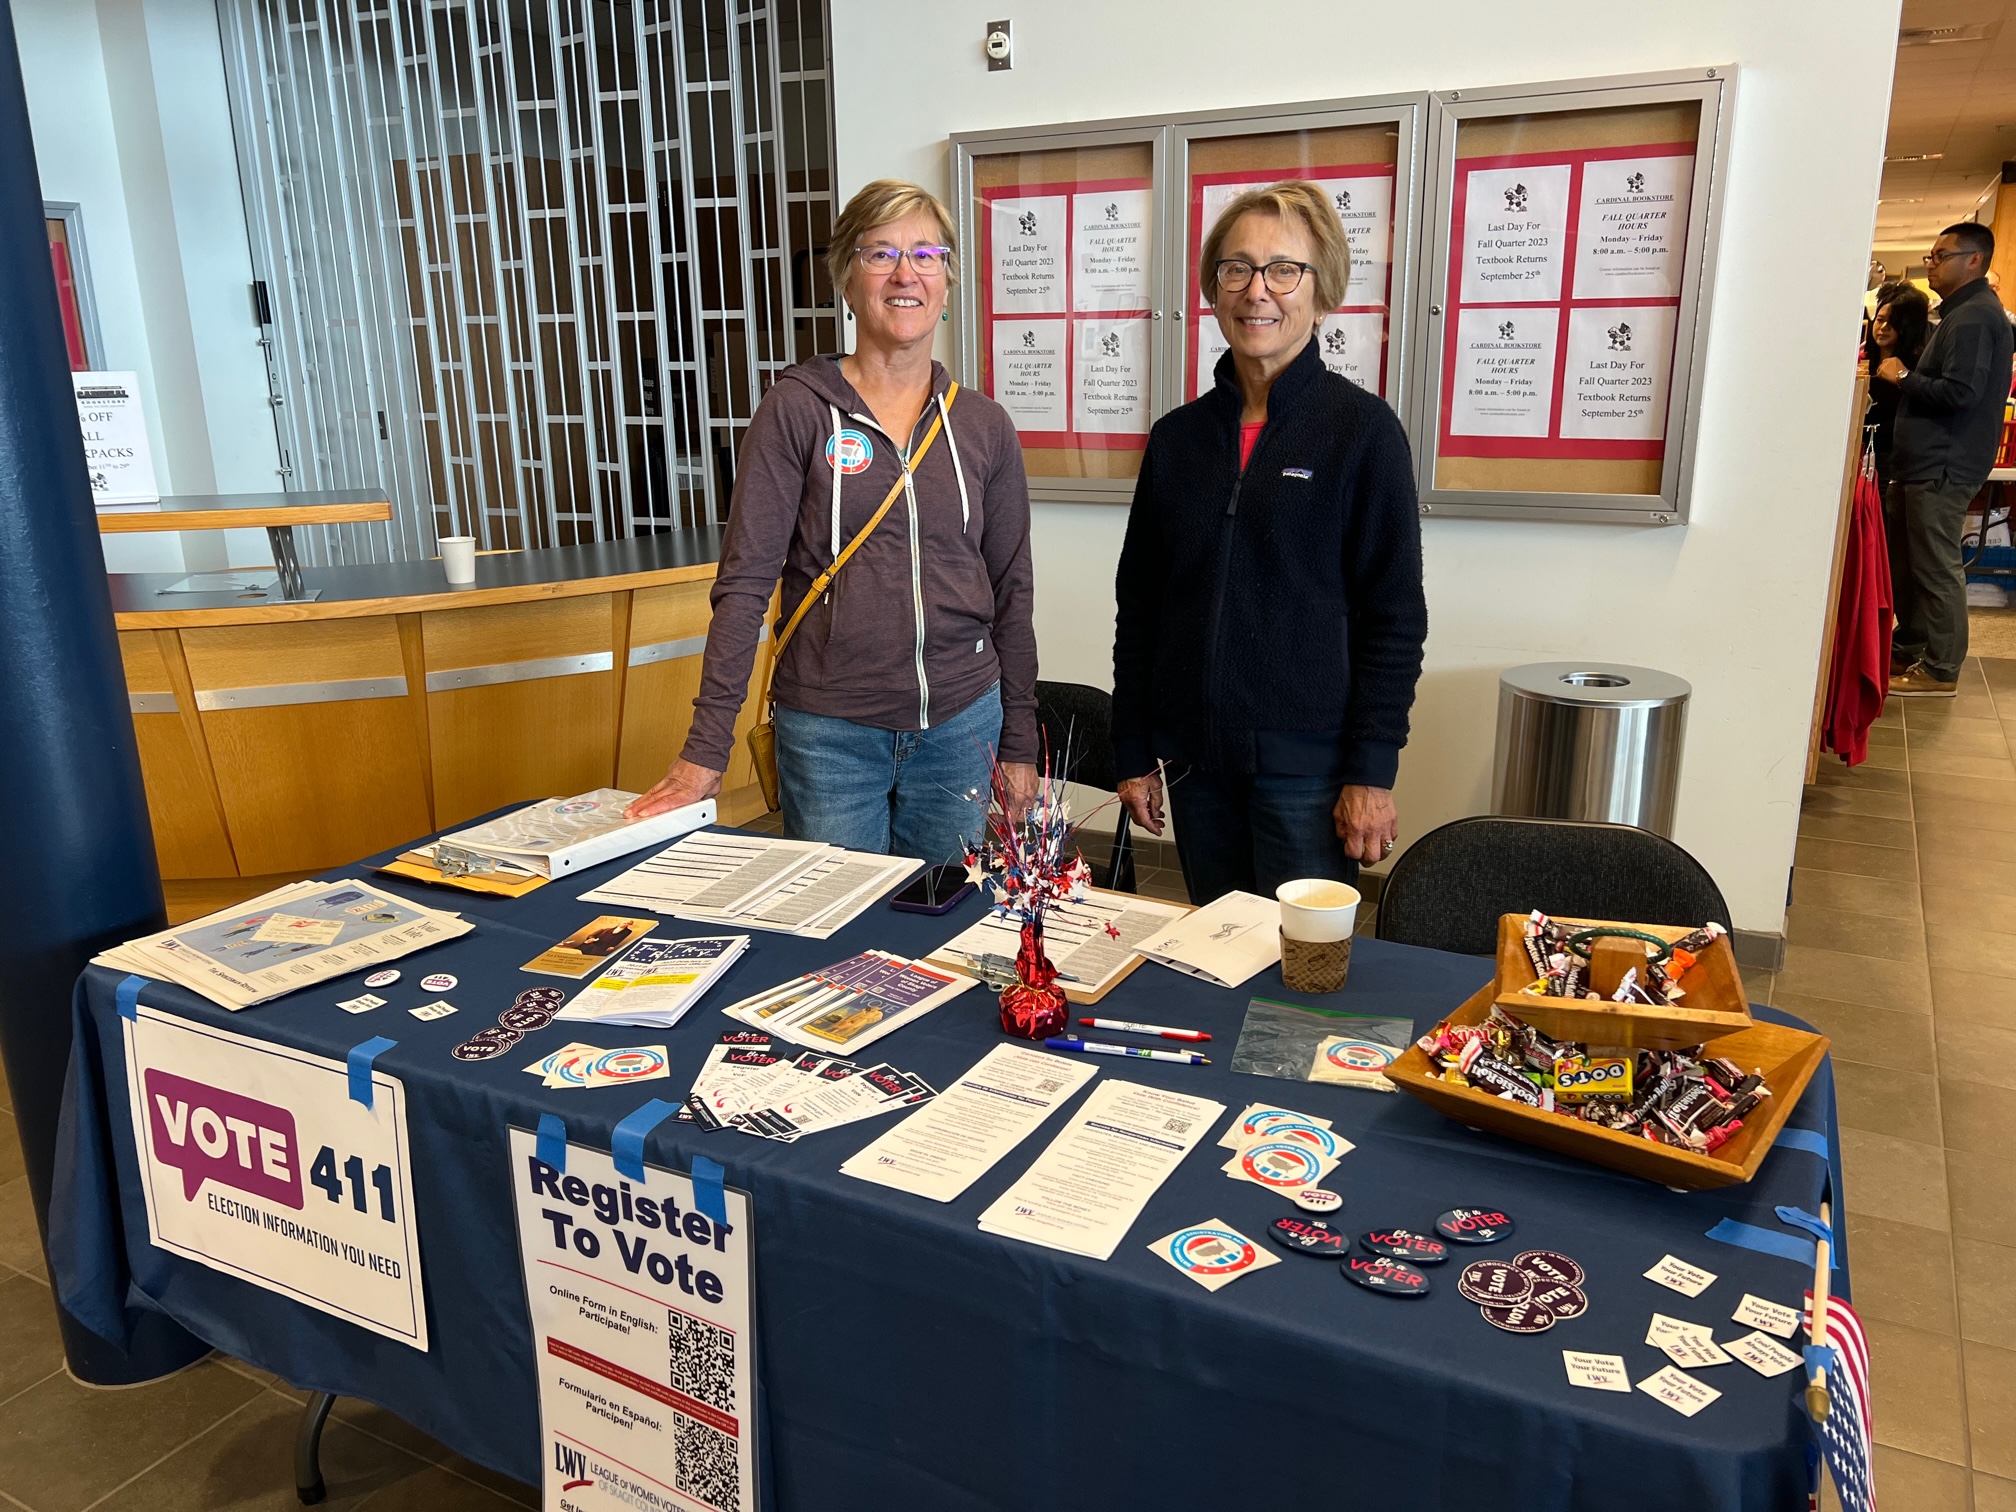 Jane and Susan registering voters at Skagit Valley College